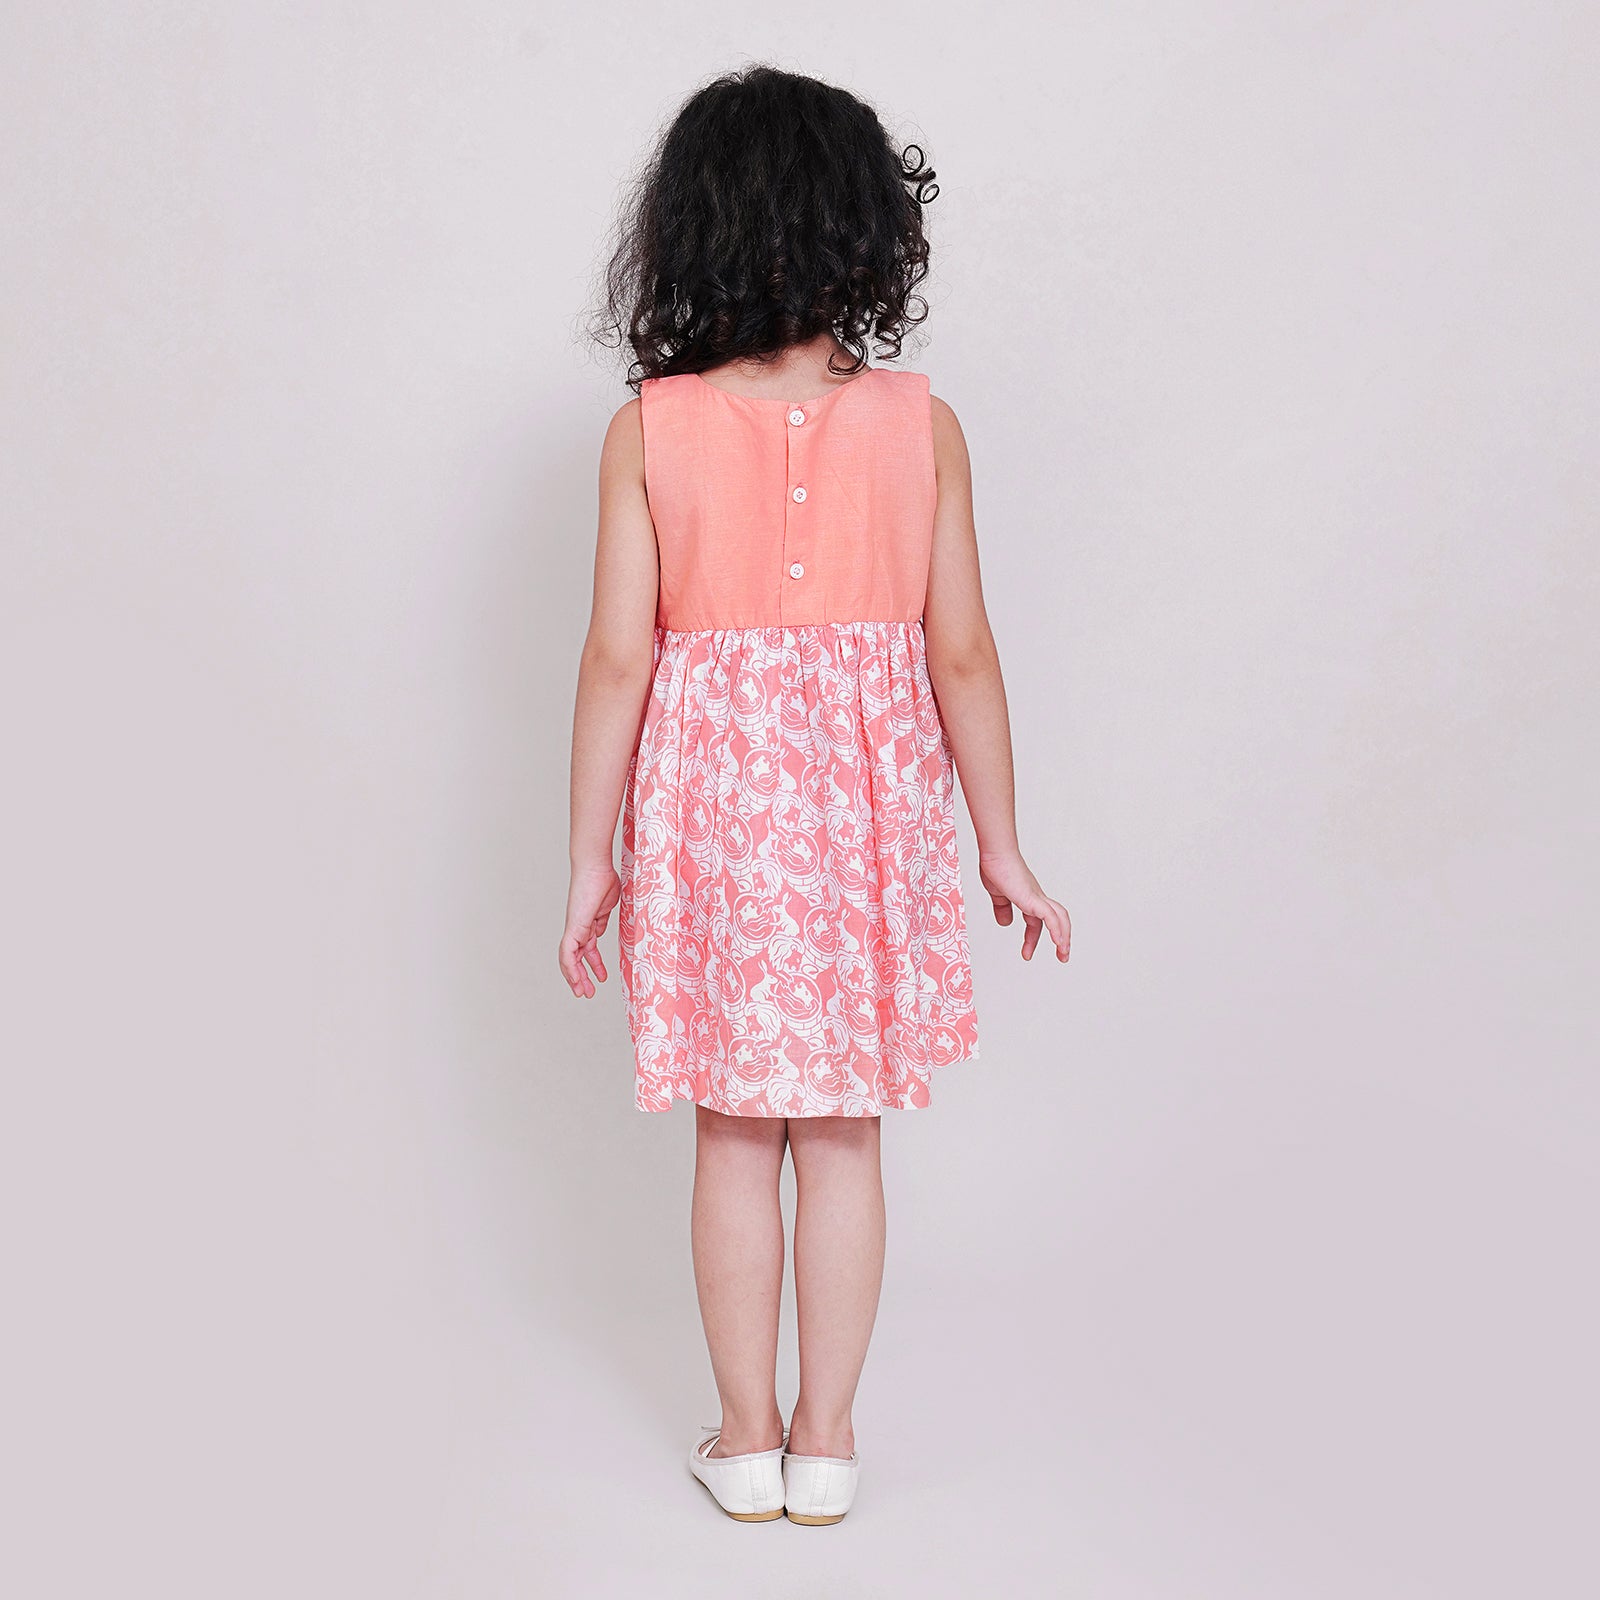 Cotton Overlapping York Frock with Bow For Girls with The Foolish Lion & The Clever Rabbit Print